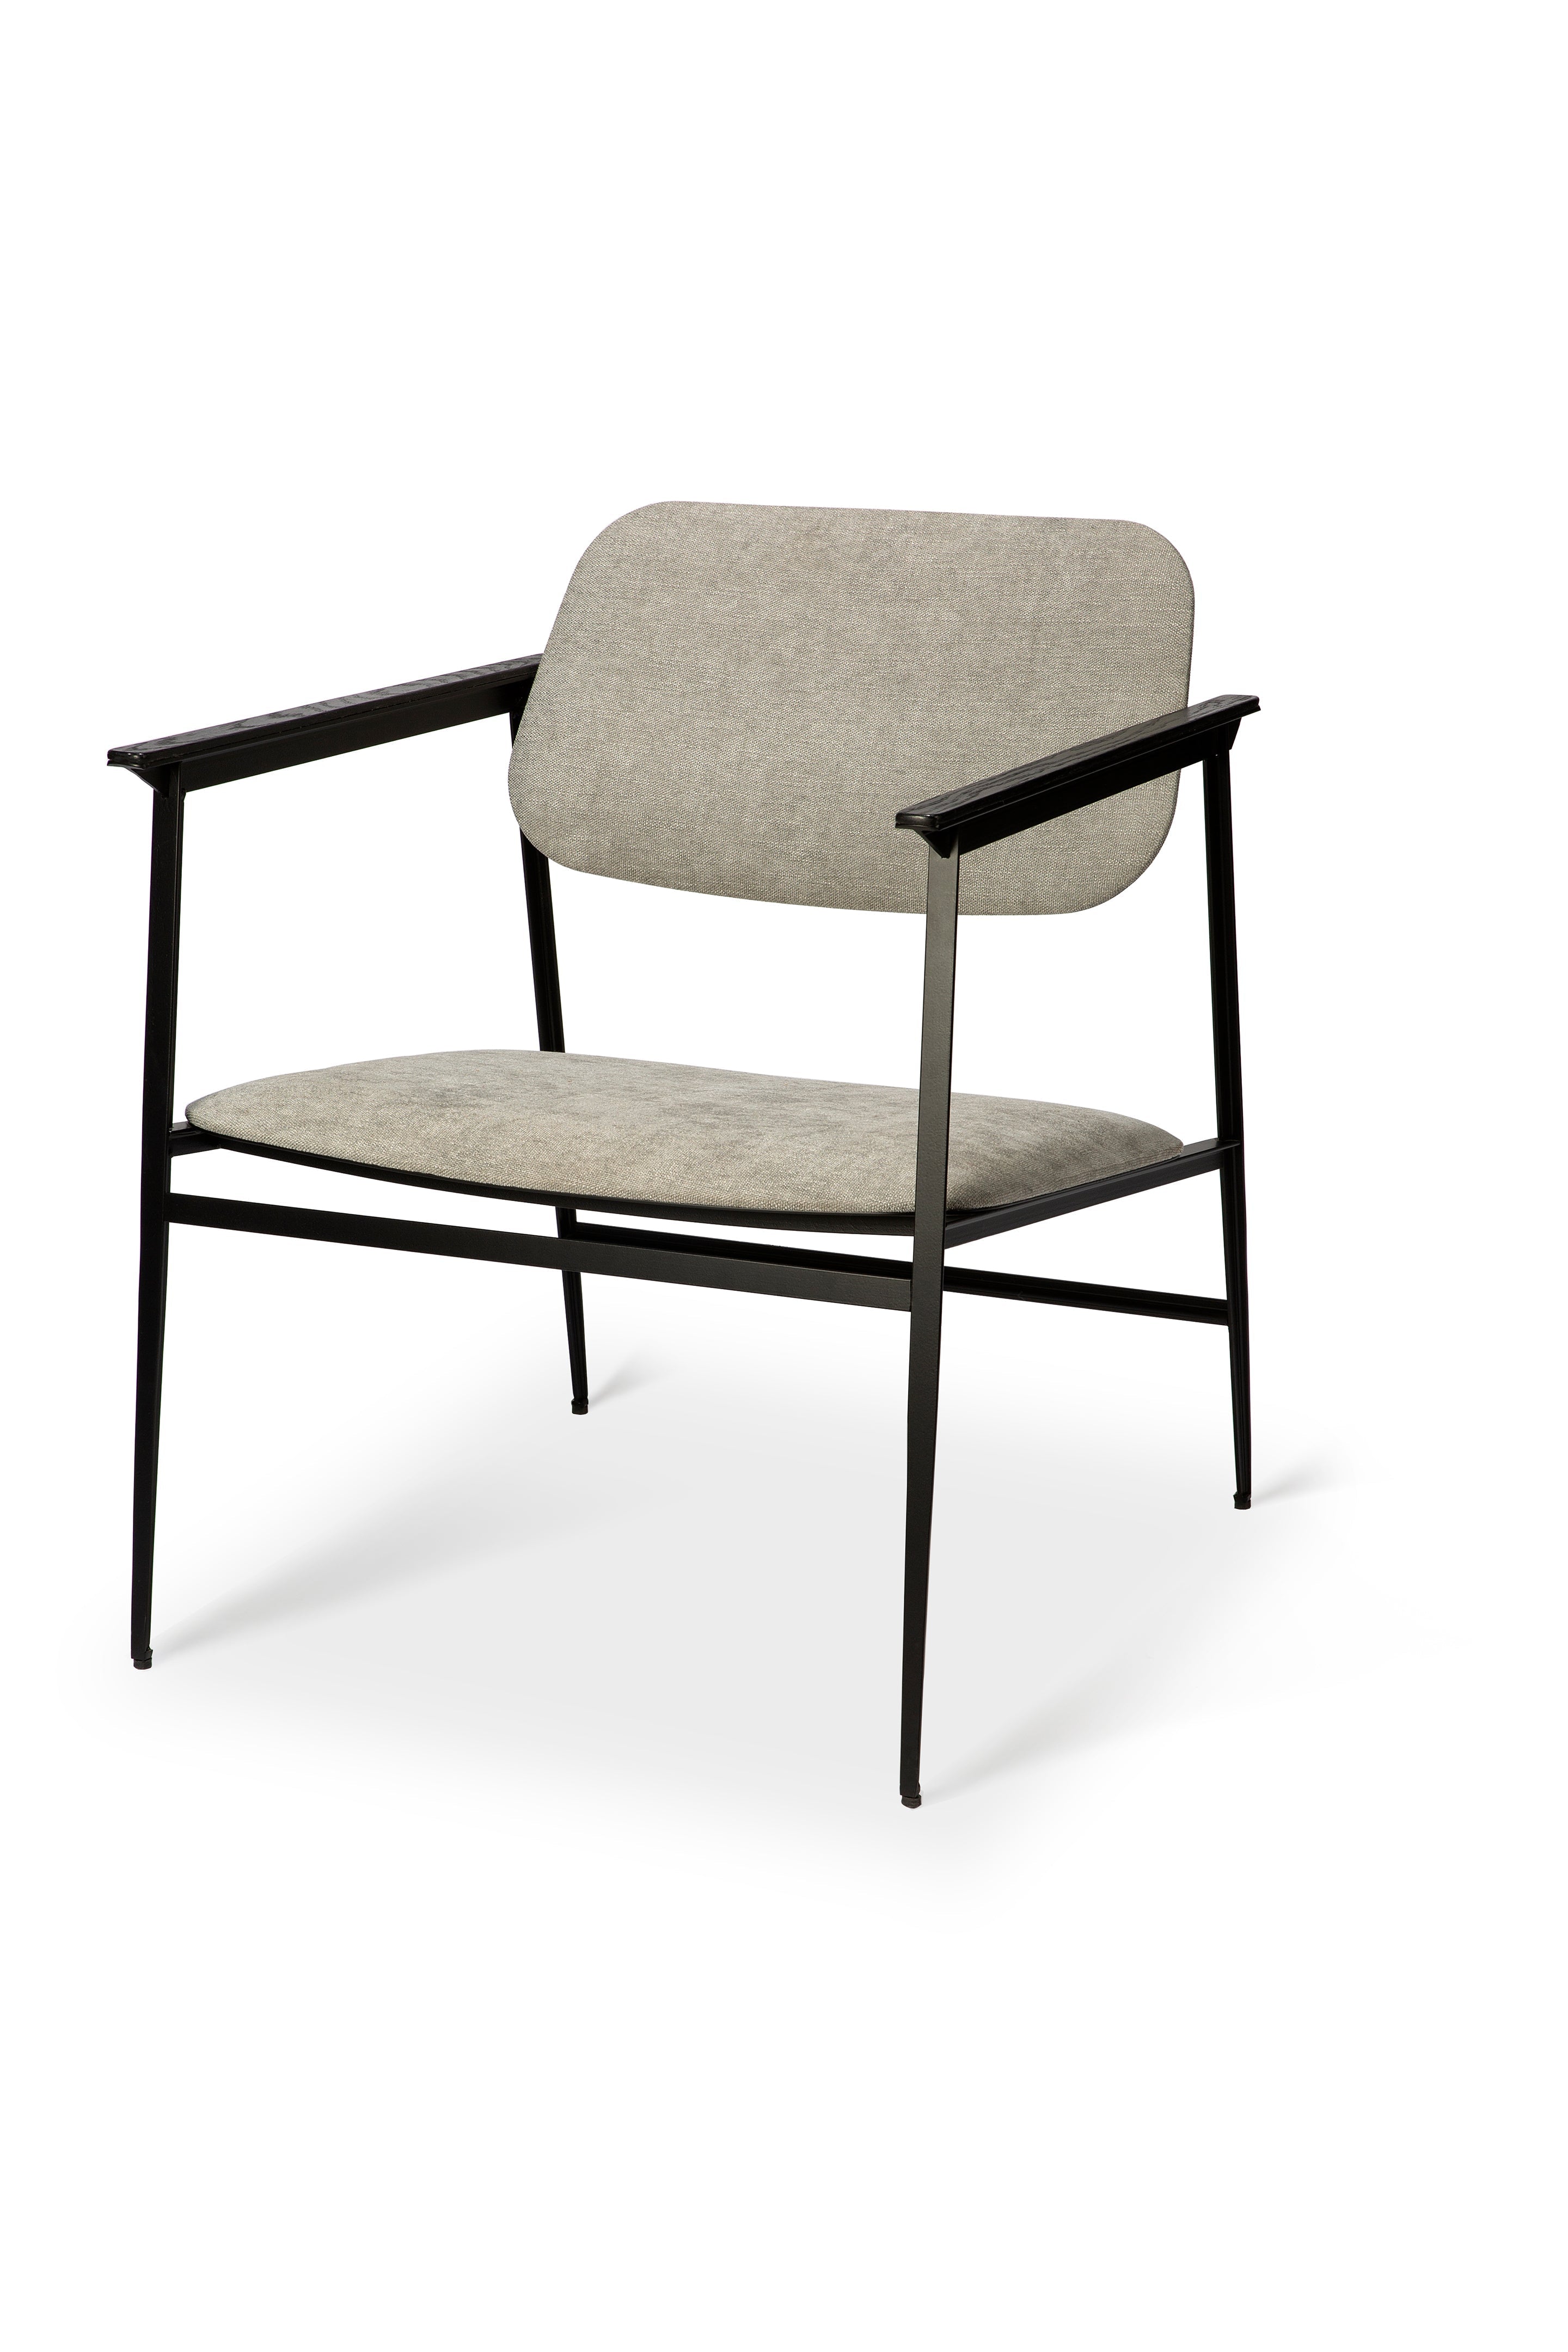 dc lounge chair by ethnicraft at adorn.house